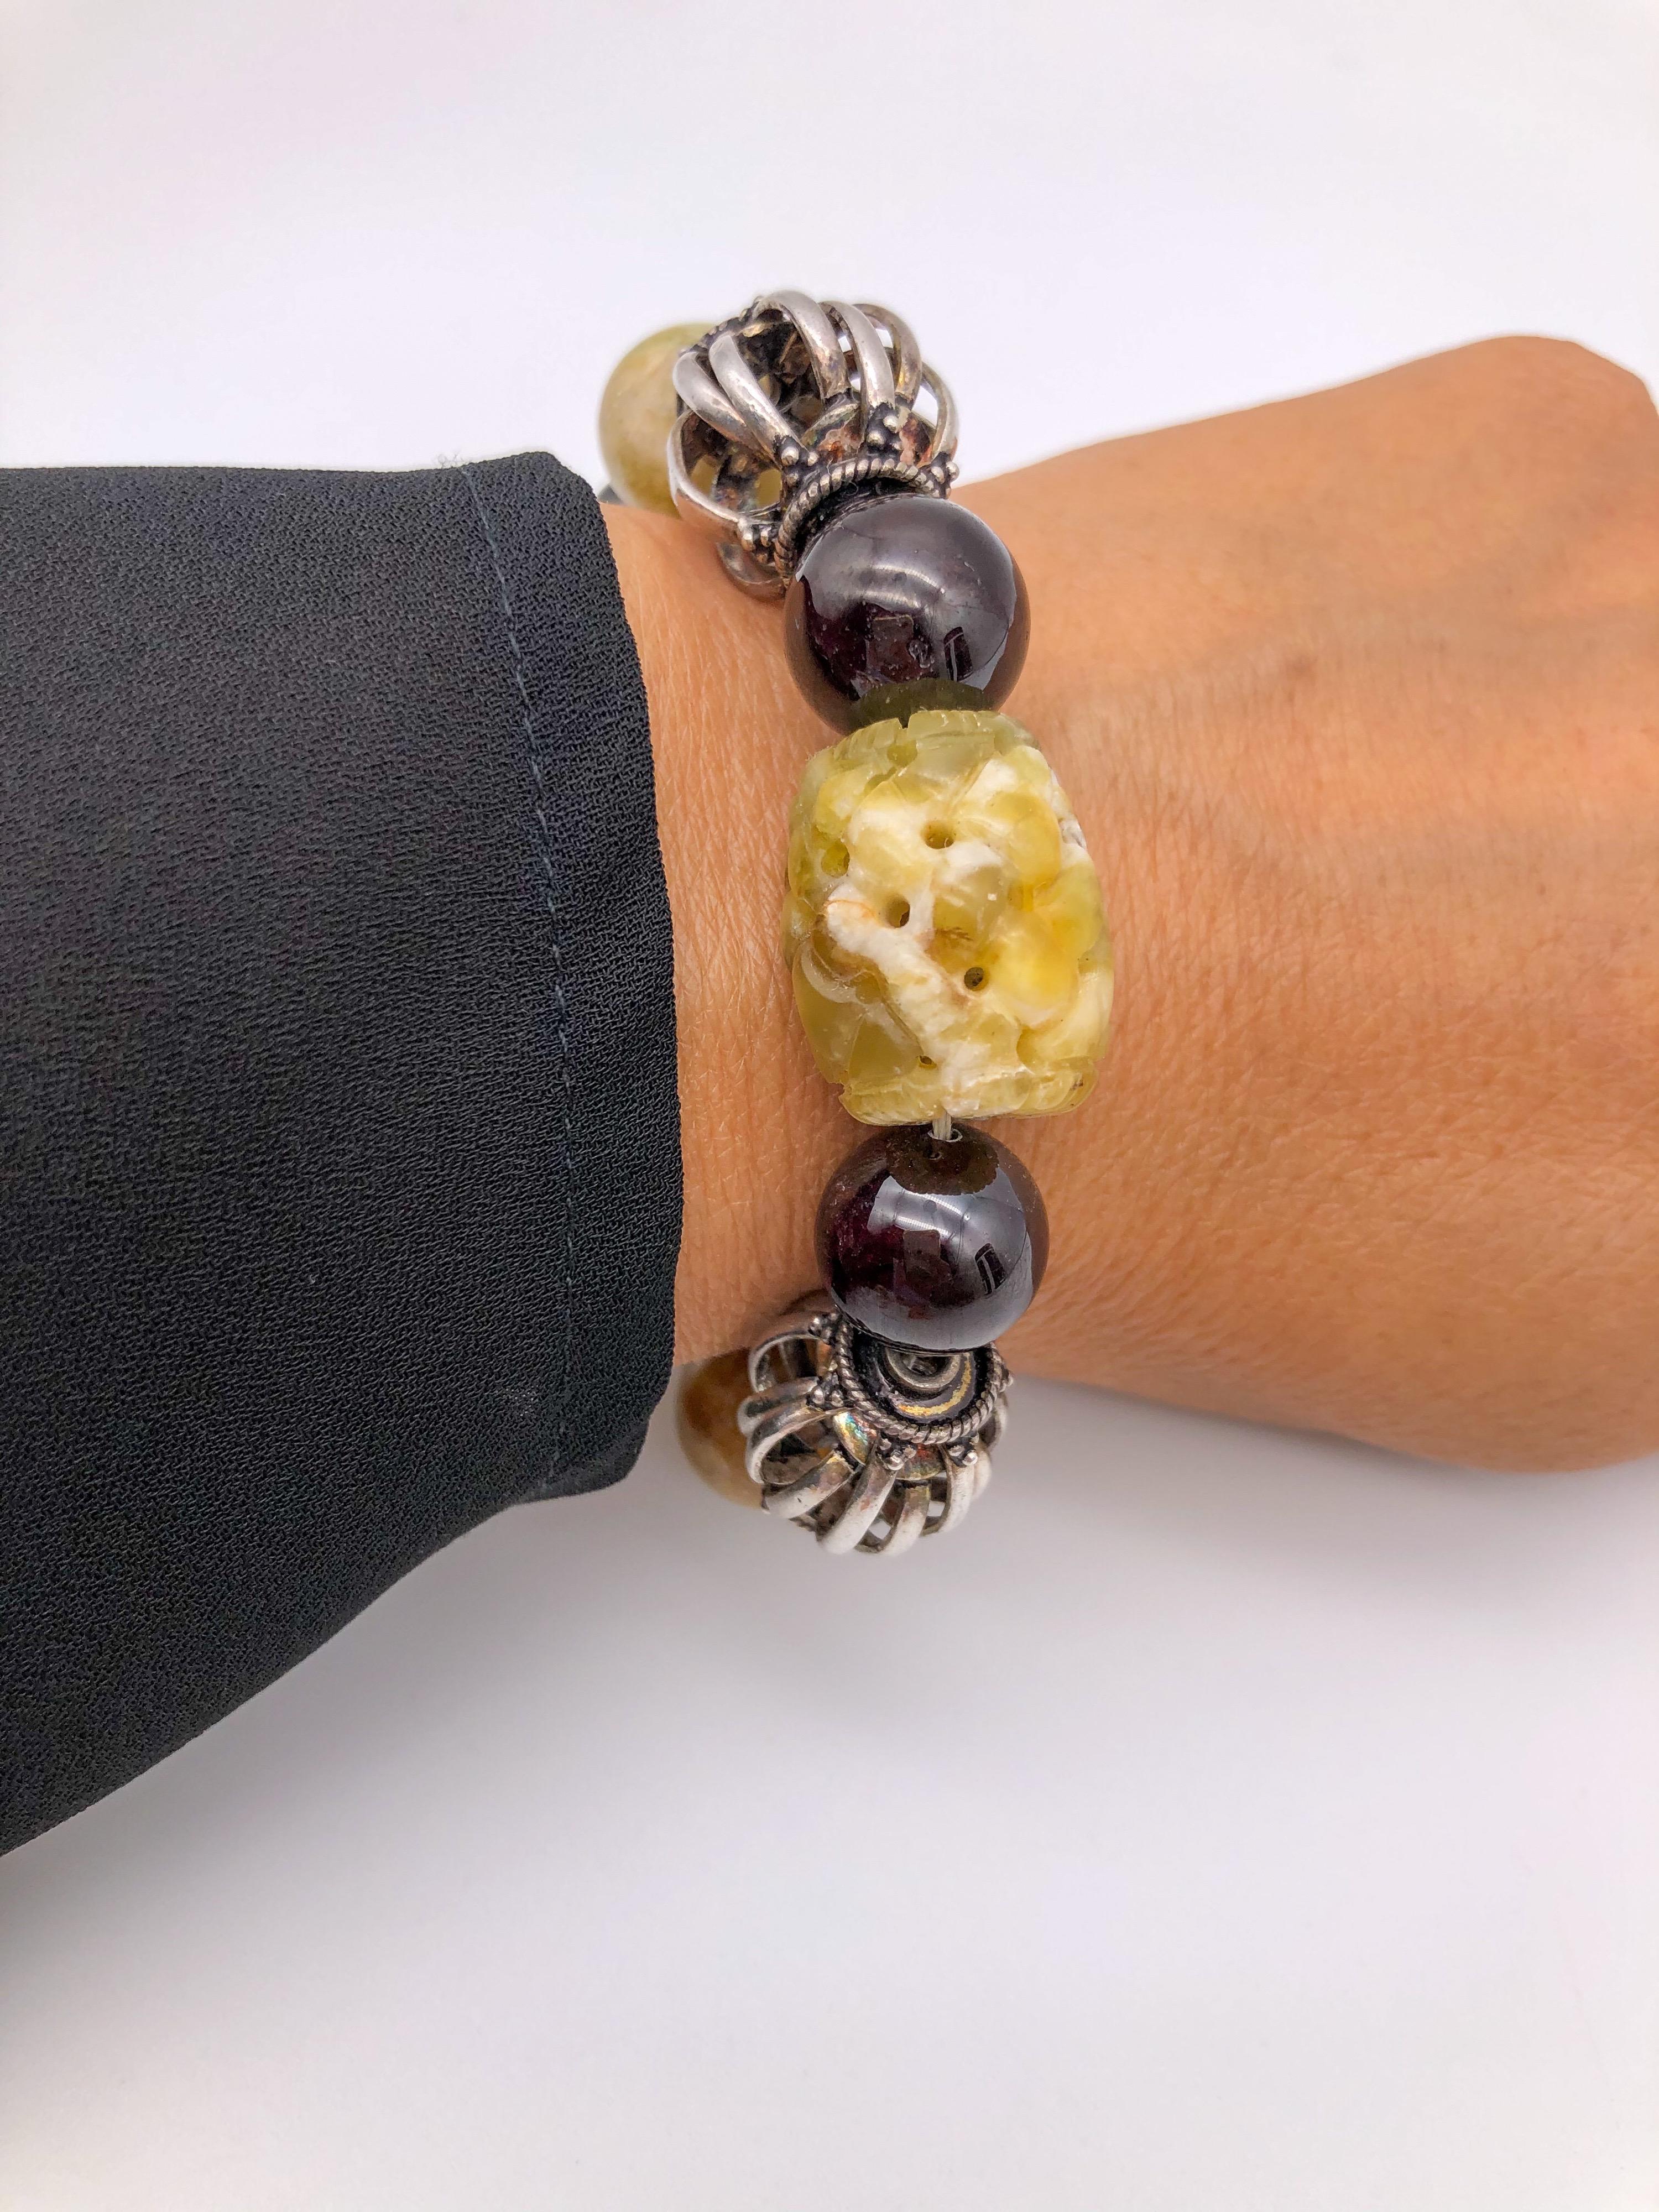 One-of-a-Kind
 Signature bracelet two gemstone, Yellow Jade polished/carved beads with brilliant graduated Garnet.
 Sterling Silver beads, The clasp is a little Sterling Silver box.
One obvious meaning of the jade stone is purity or purification.